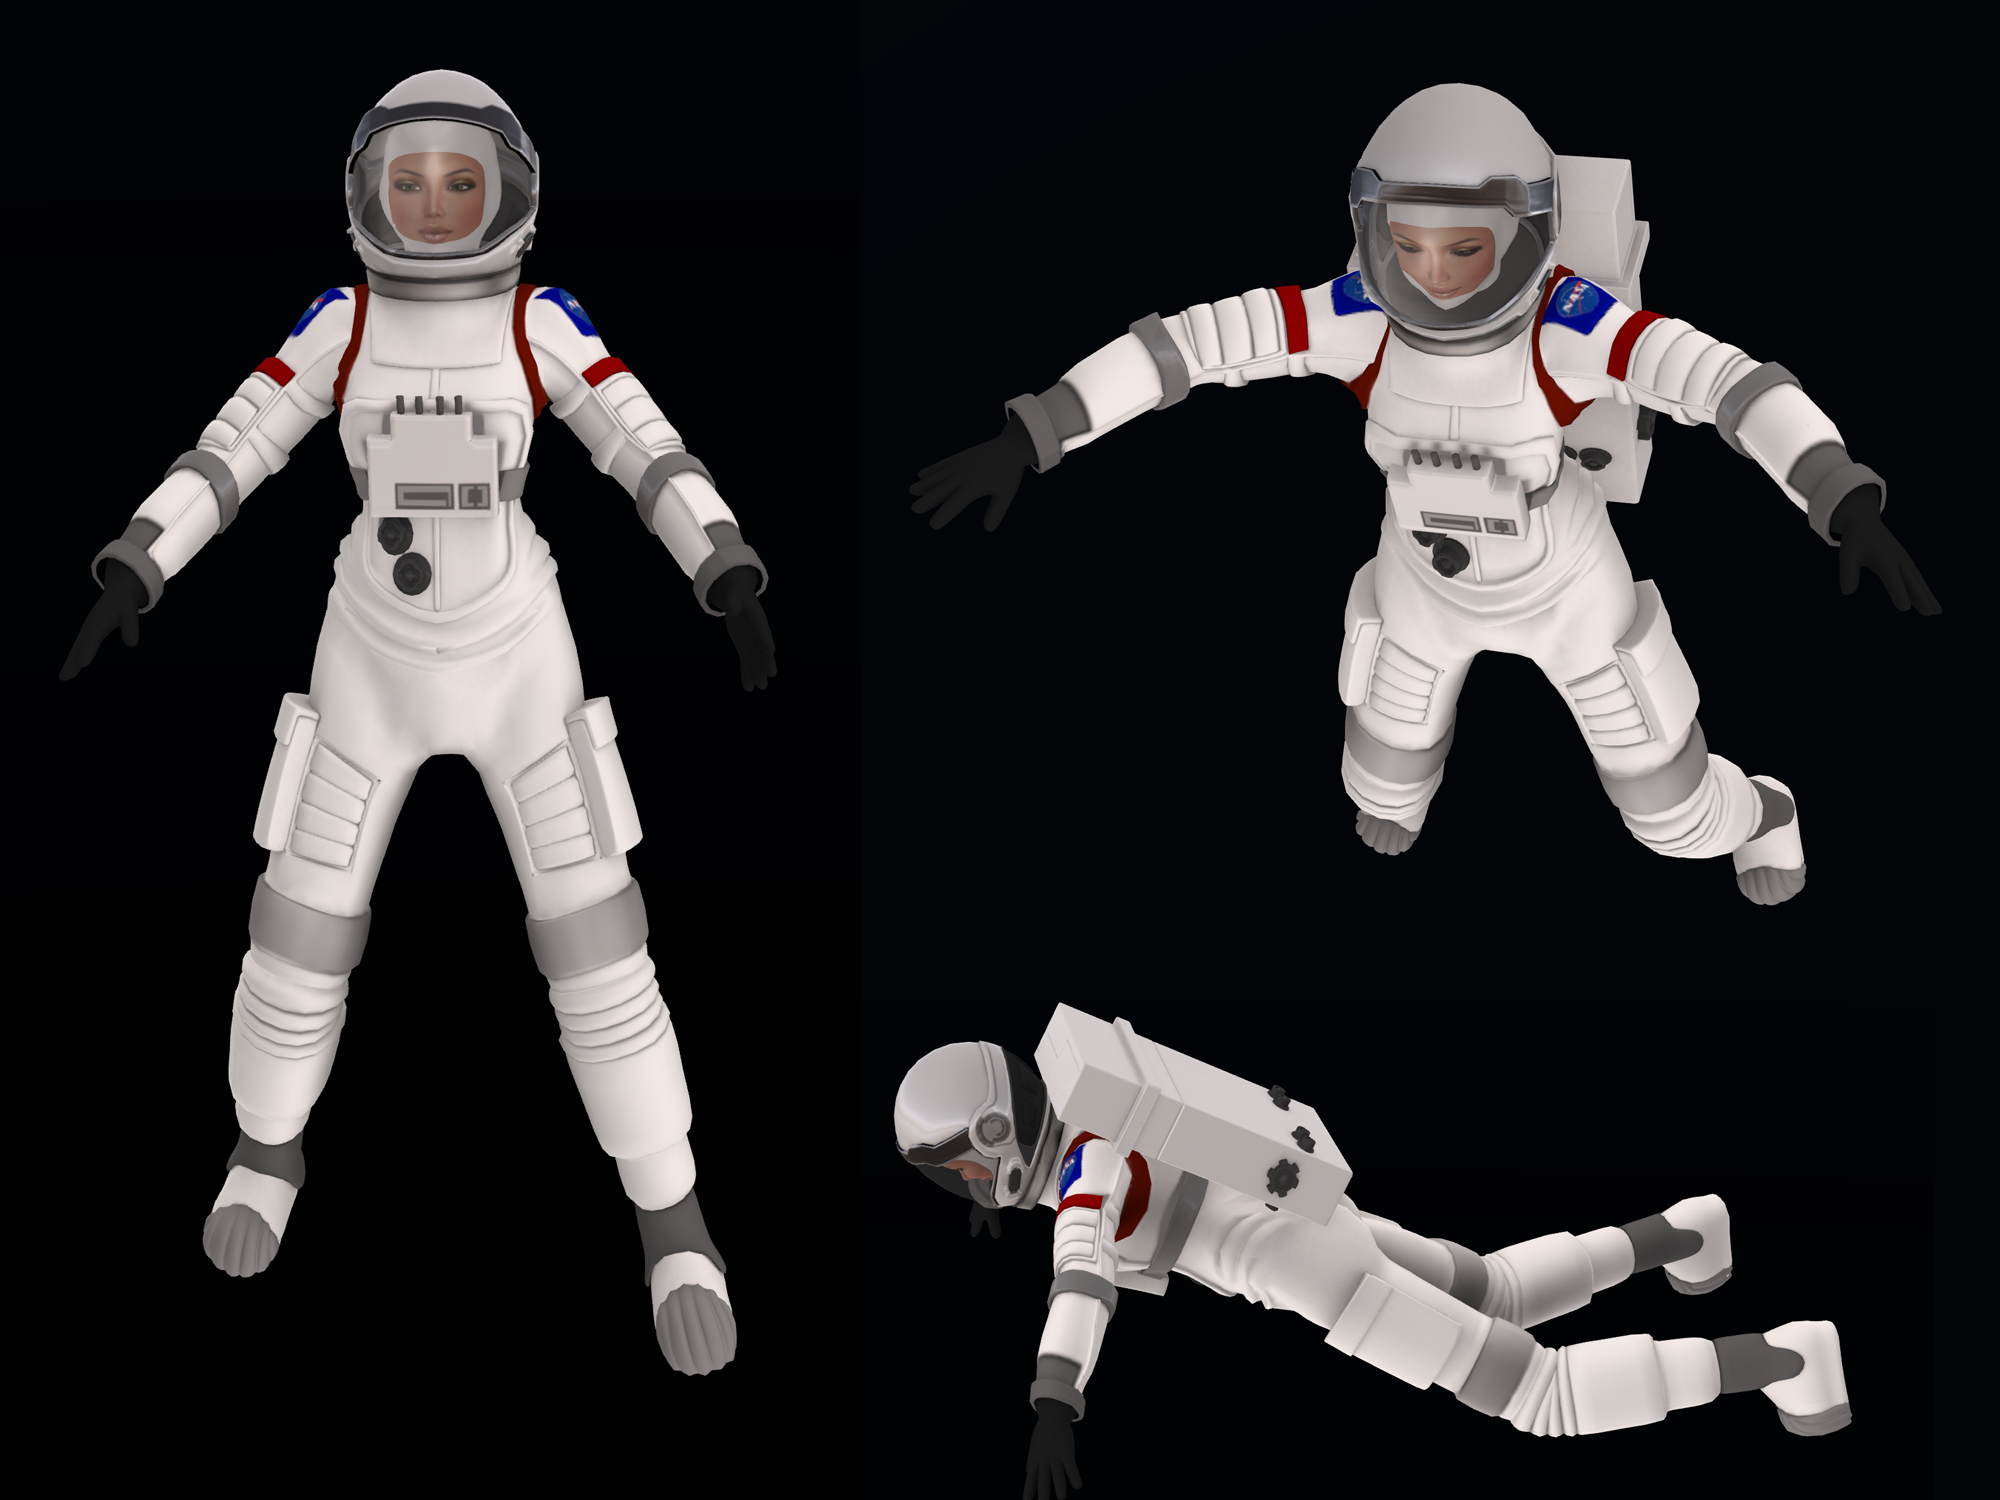 Full Perm Rigged Mesh Female Space Suit